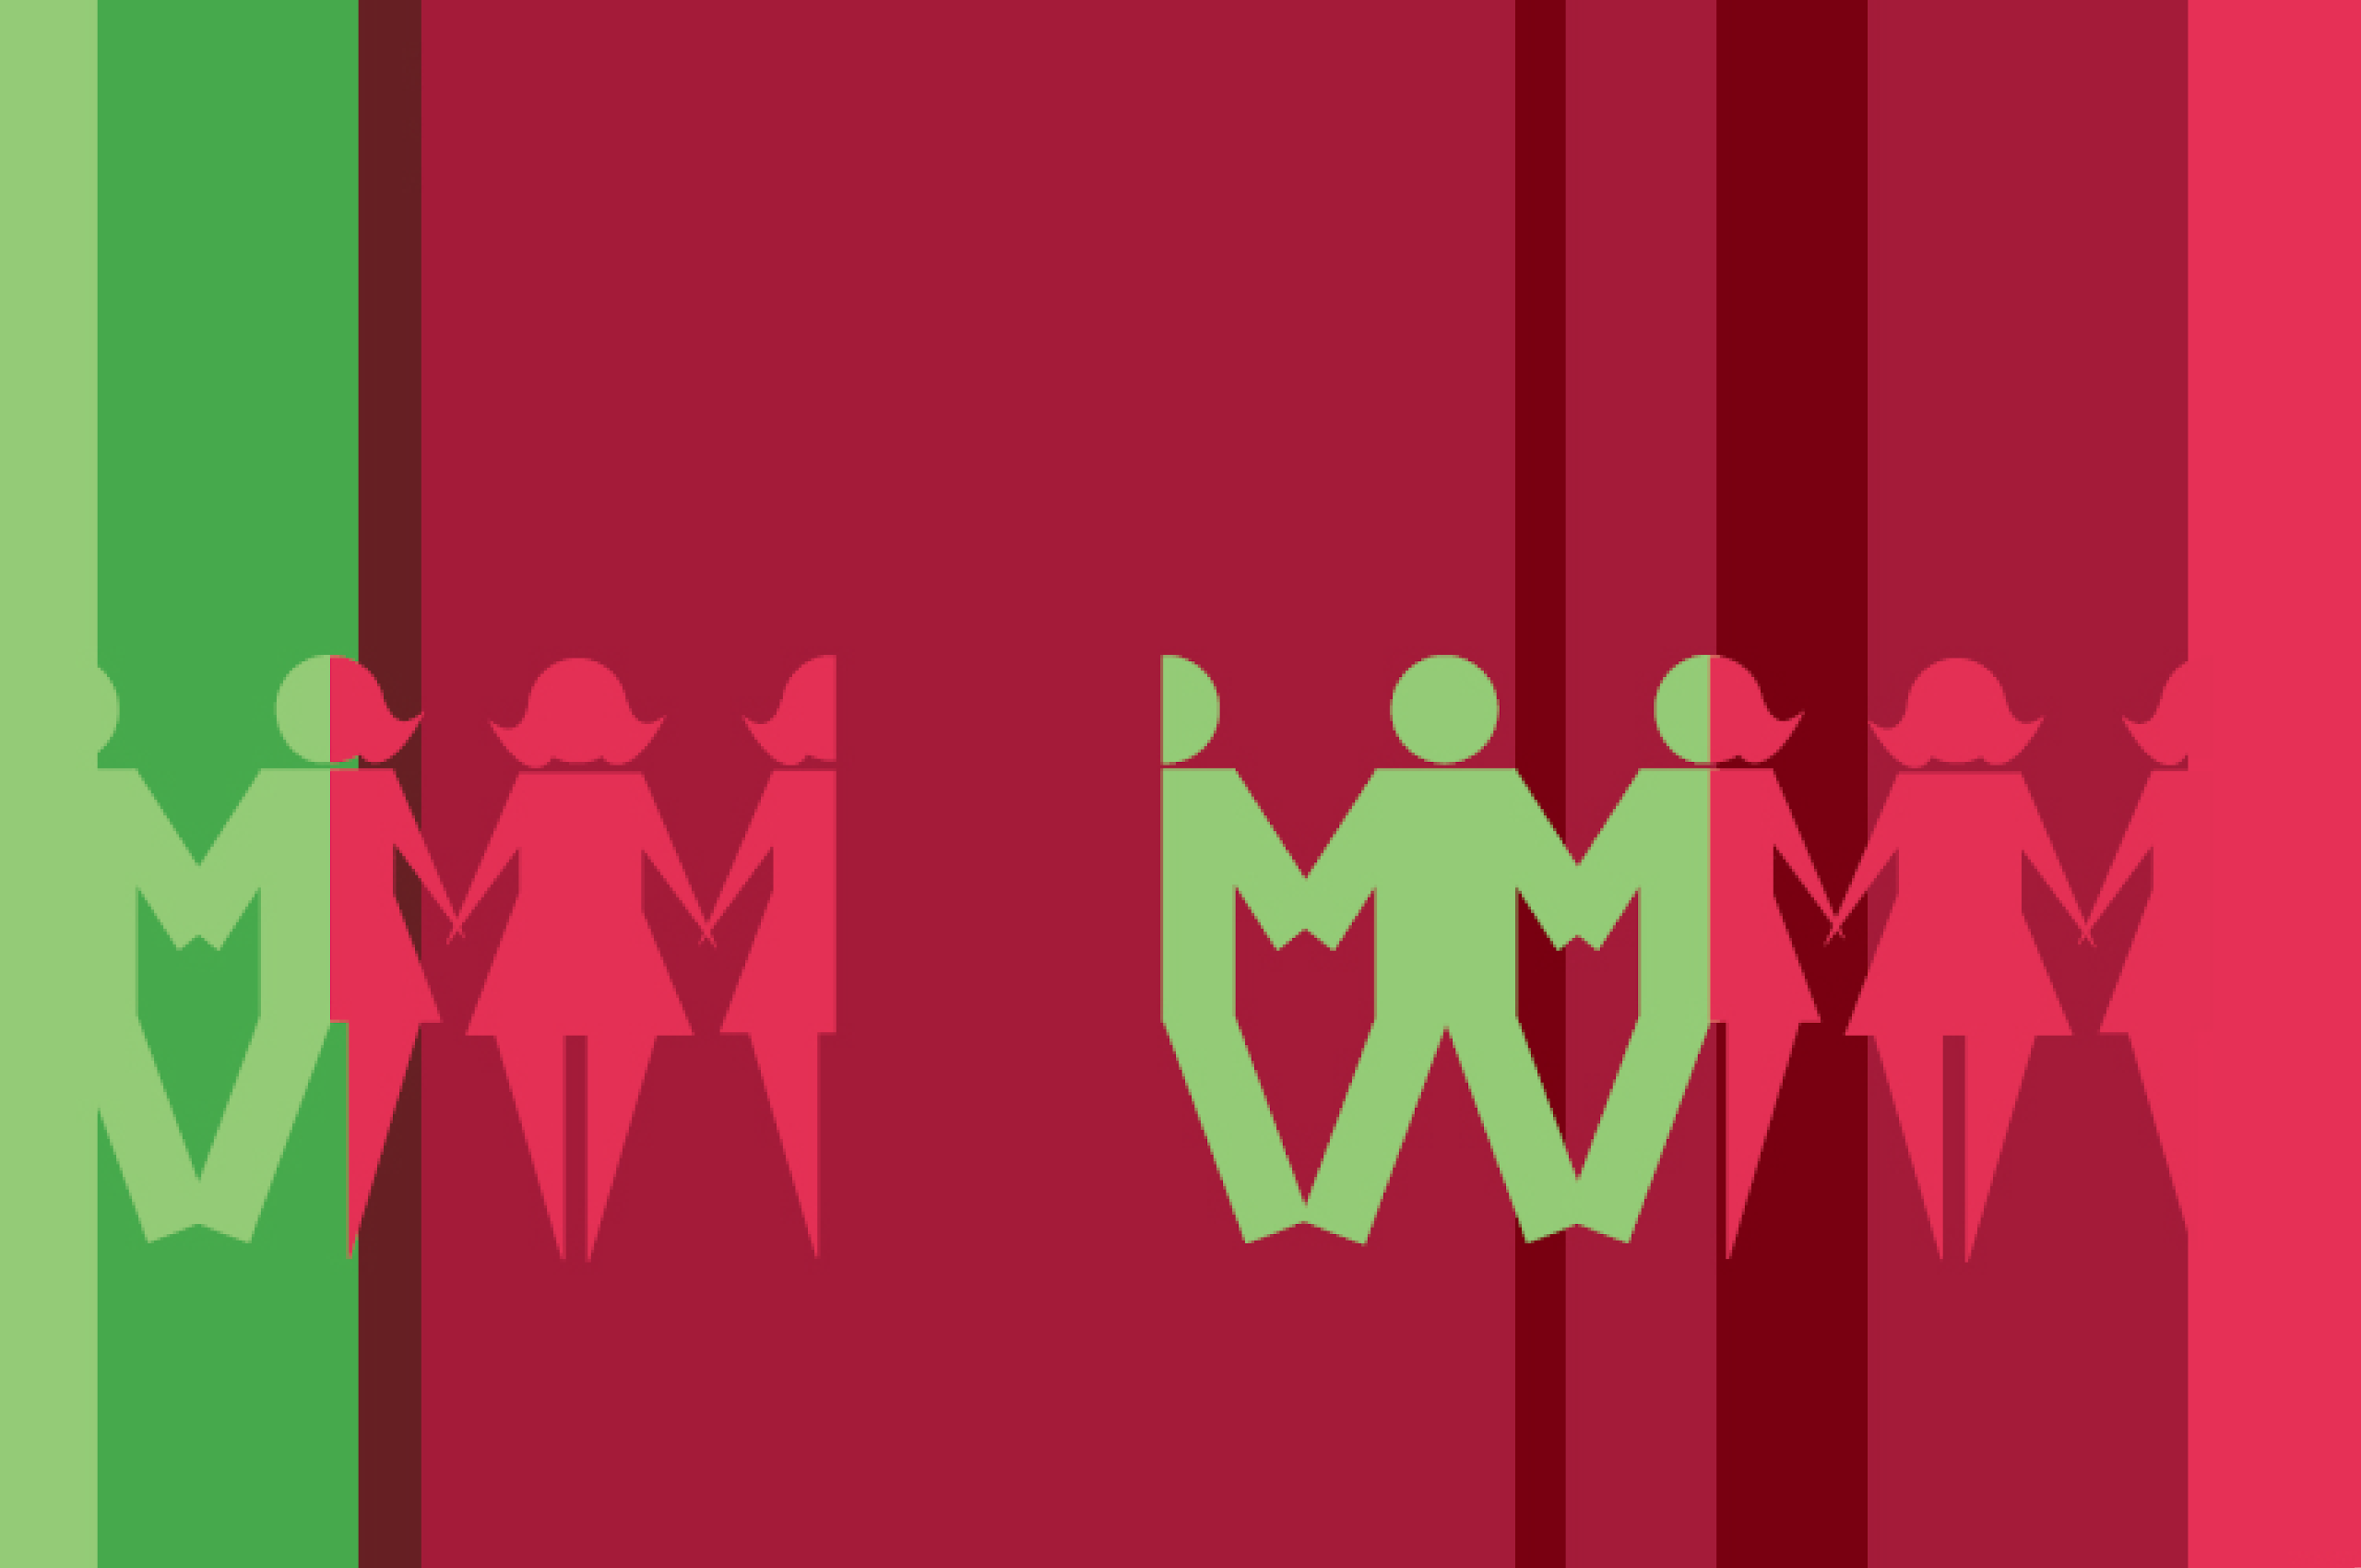 Dark red and green striped background with 'male' and 'female' bathroom-sign-style pictograms, holding hands